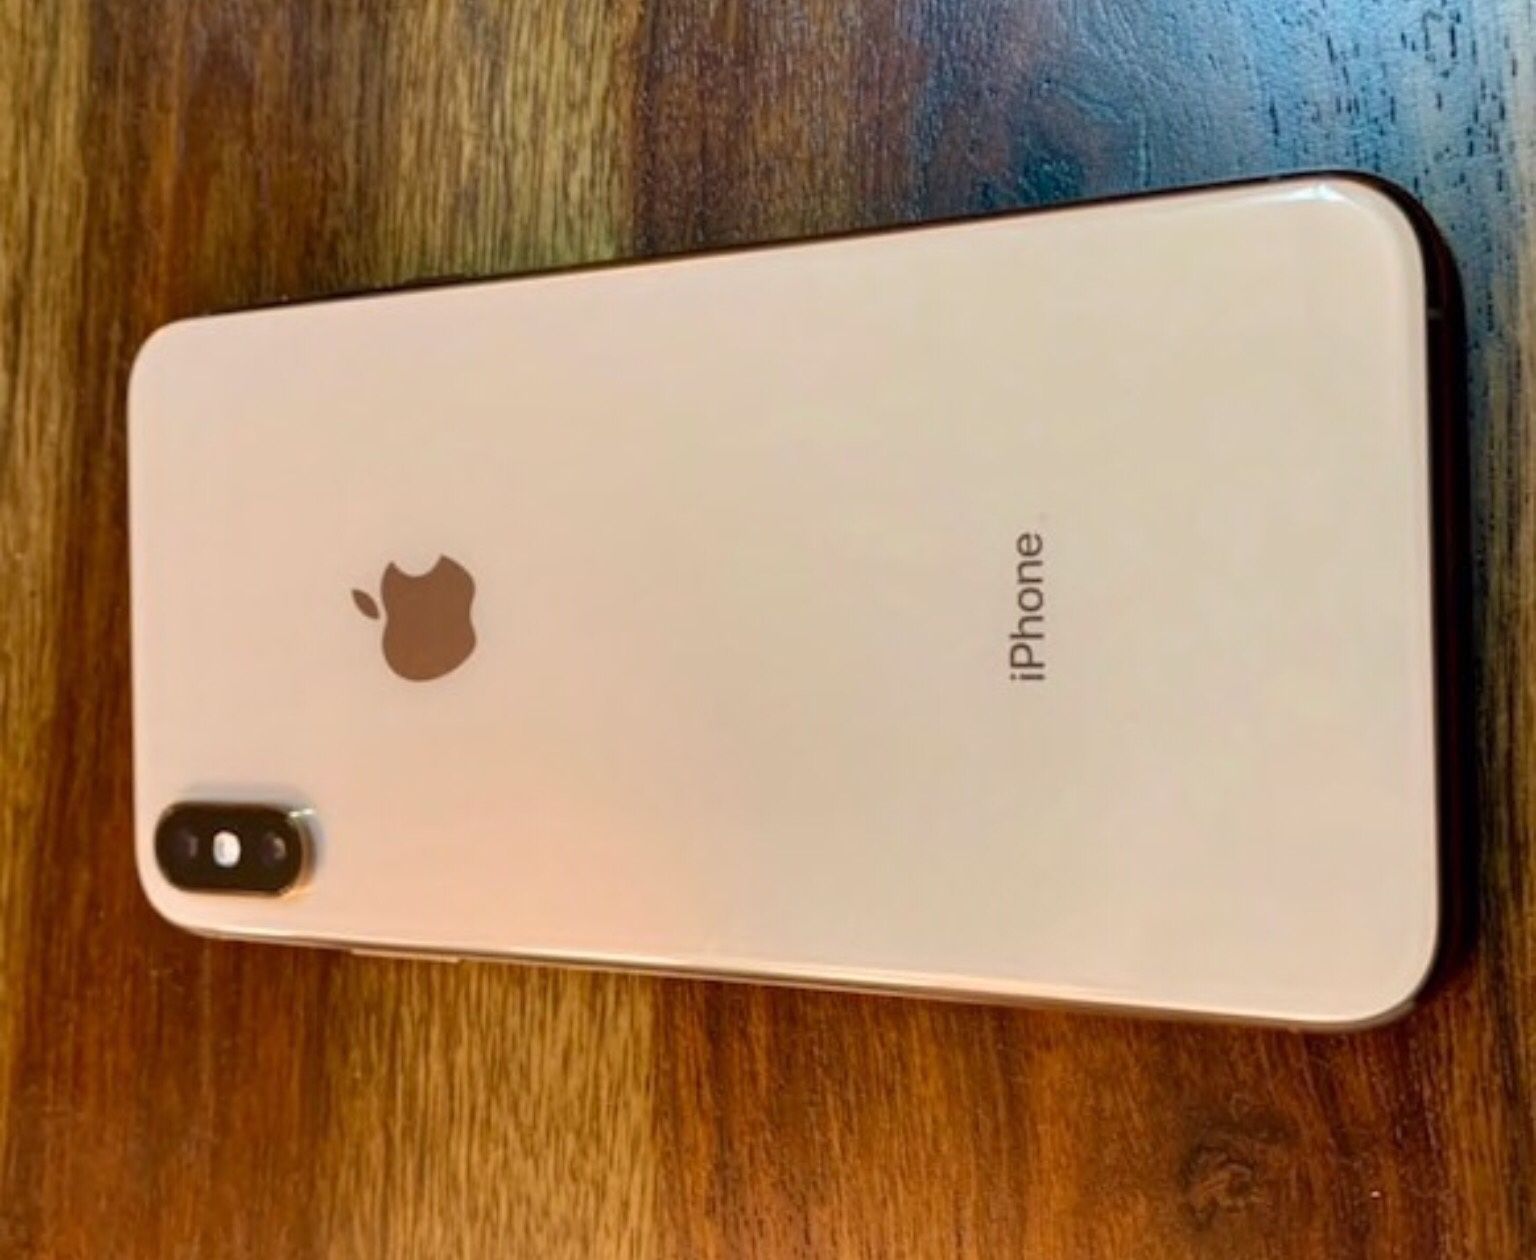 Apple iPhone X 64GB (T-MOBILE) UNLOCKED $430 FIRM